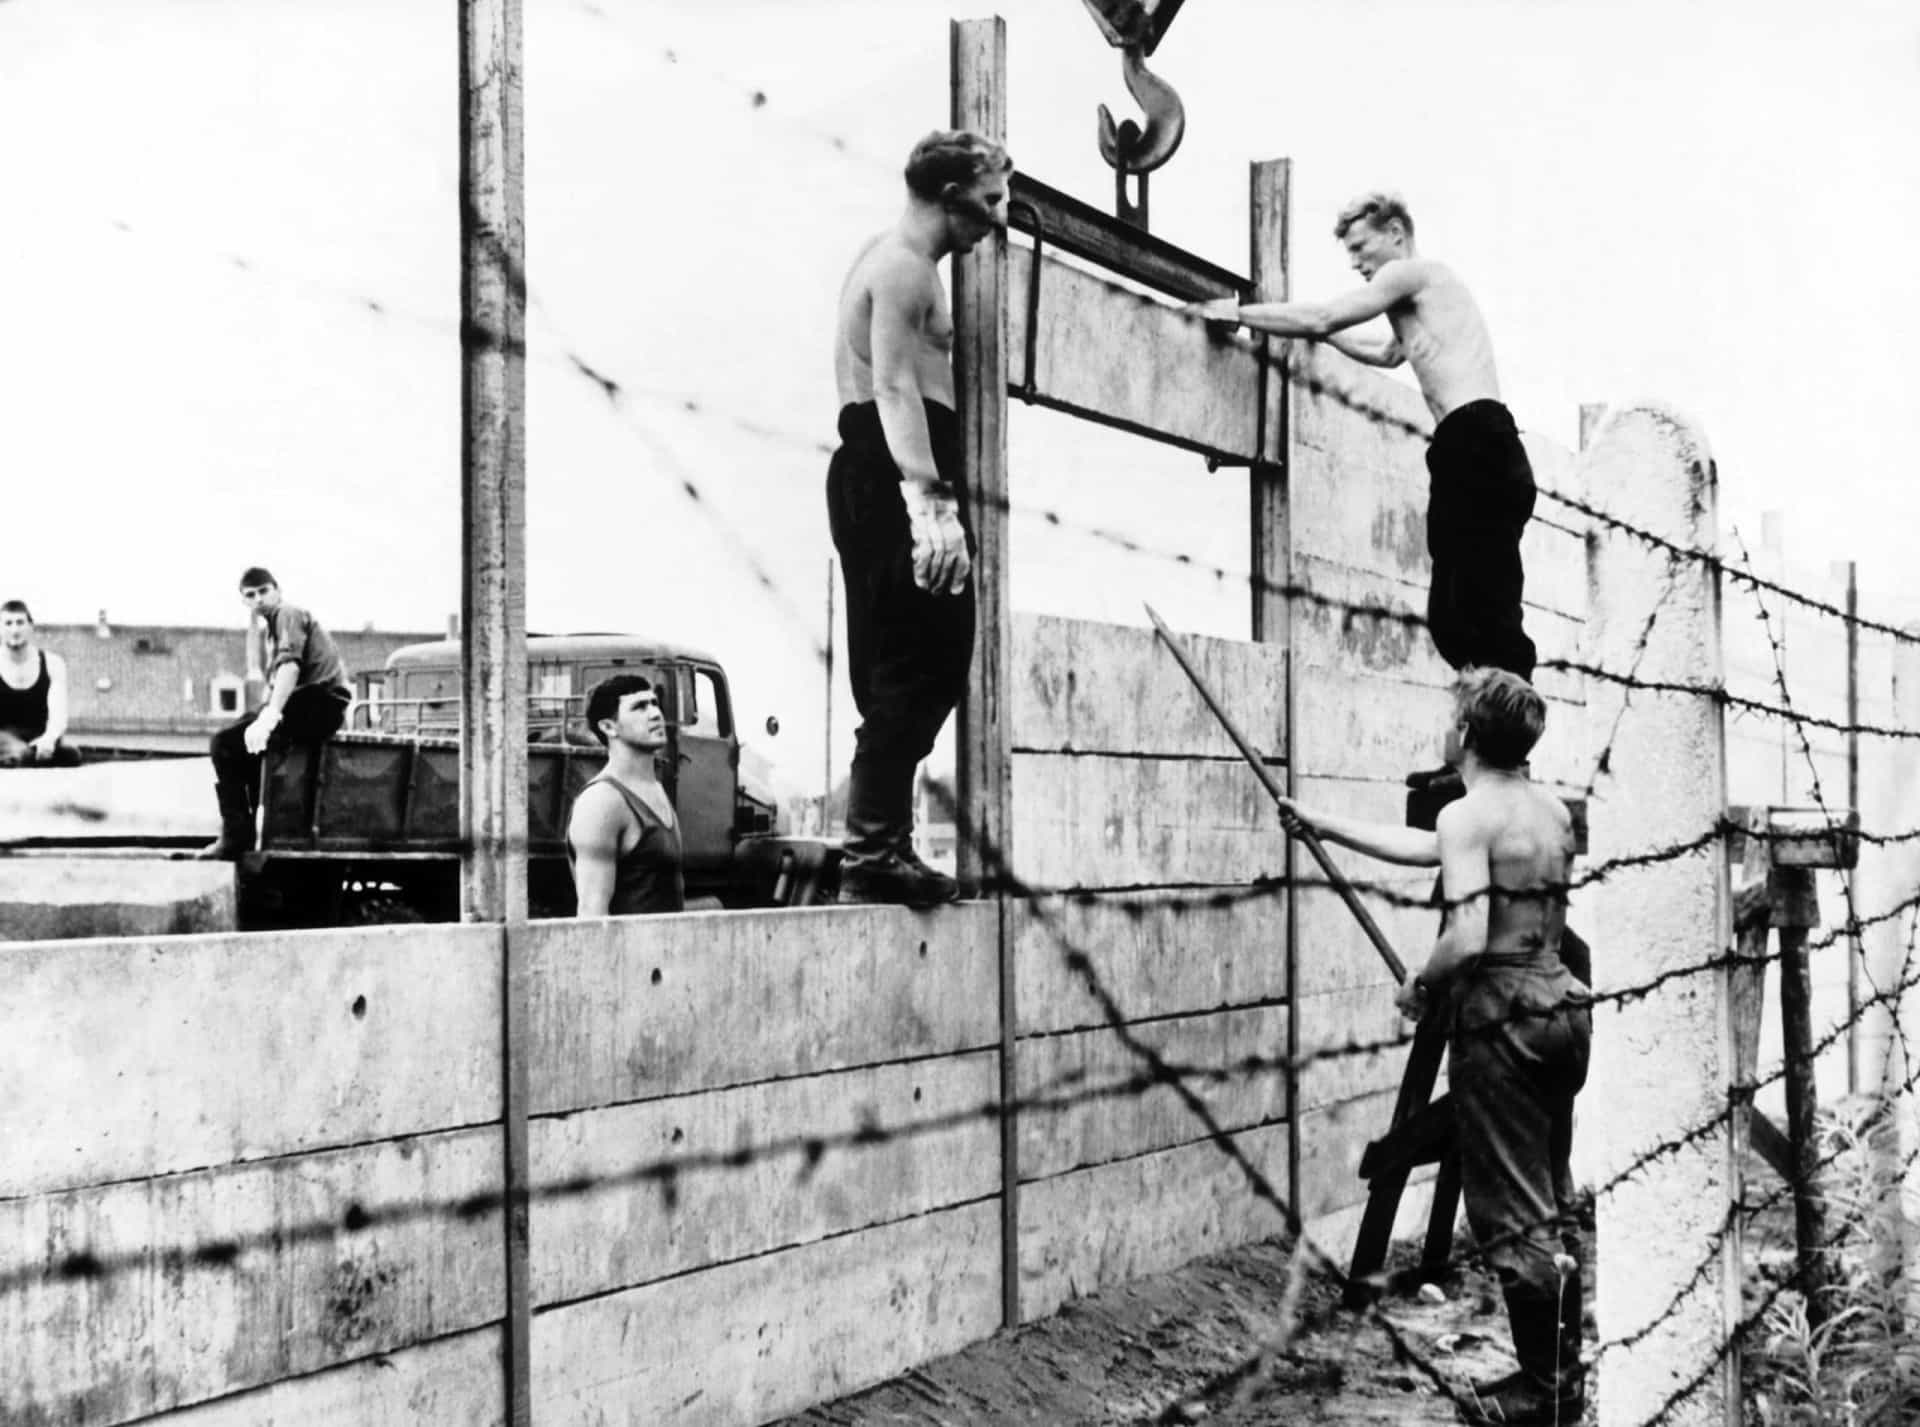 <p>The wall was lent added dimension and impregnability as its height increased to 3.5 m (11.5 ft). The barricade was reinforced by mesh fencing, signal fencing, anti-vehicle trenches, barbed wire, dogs on long lines, "beds of nails" (also known as "Stalin's Carpet") under balconies hanging over the "death strip," over 116 watchtowers, and 20 bunkers staffed with hundreds of armed soldiers.</p><p><a href="https://www.msn.com/en-us/community/channel/vid-7xx8mnucu55yw63we9va2gwr7uihbxwc68fxqp25x6tg4ftibpra?cvid=94631541bc0f4f89bfd59158d696ad7e">Follow us and access great exclusive content everyday</a></p>